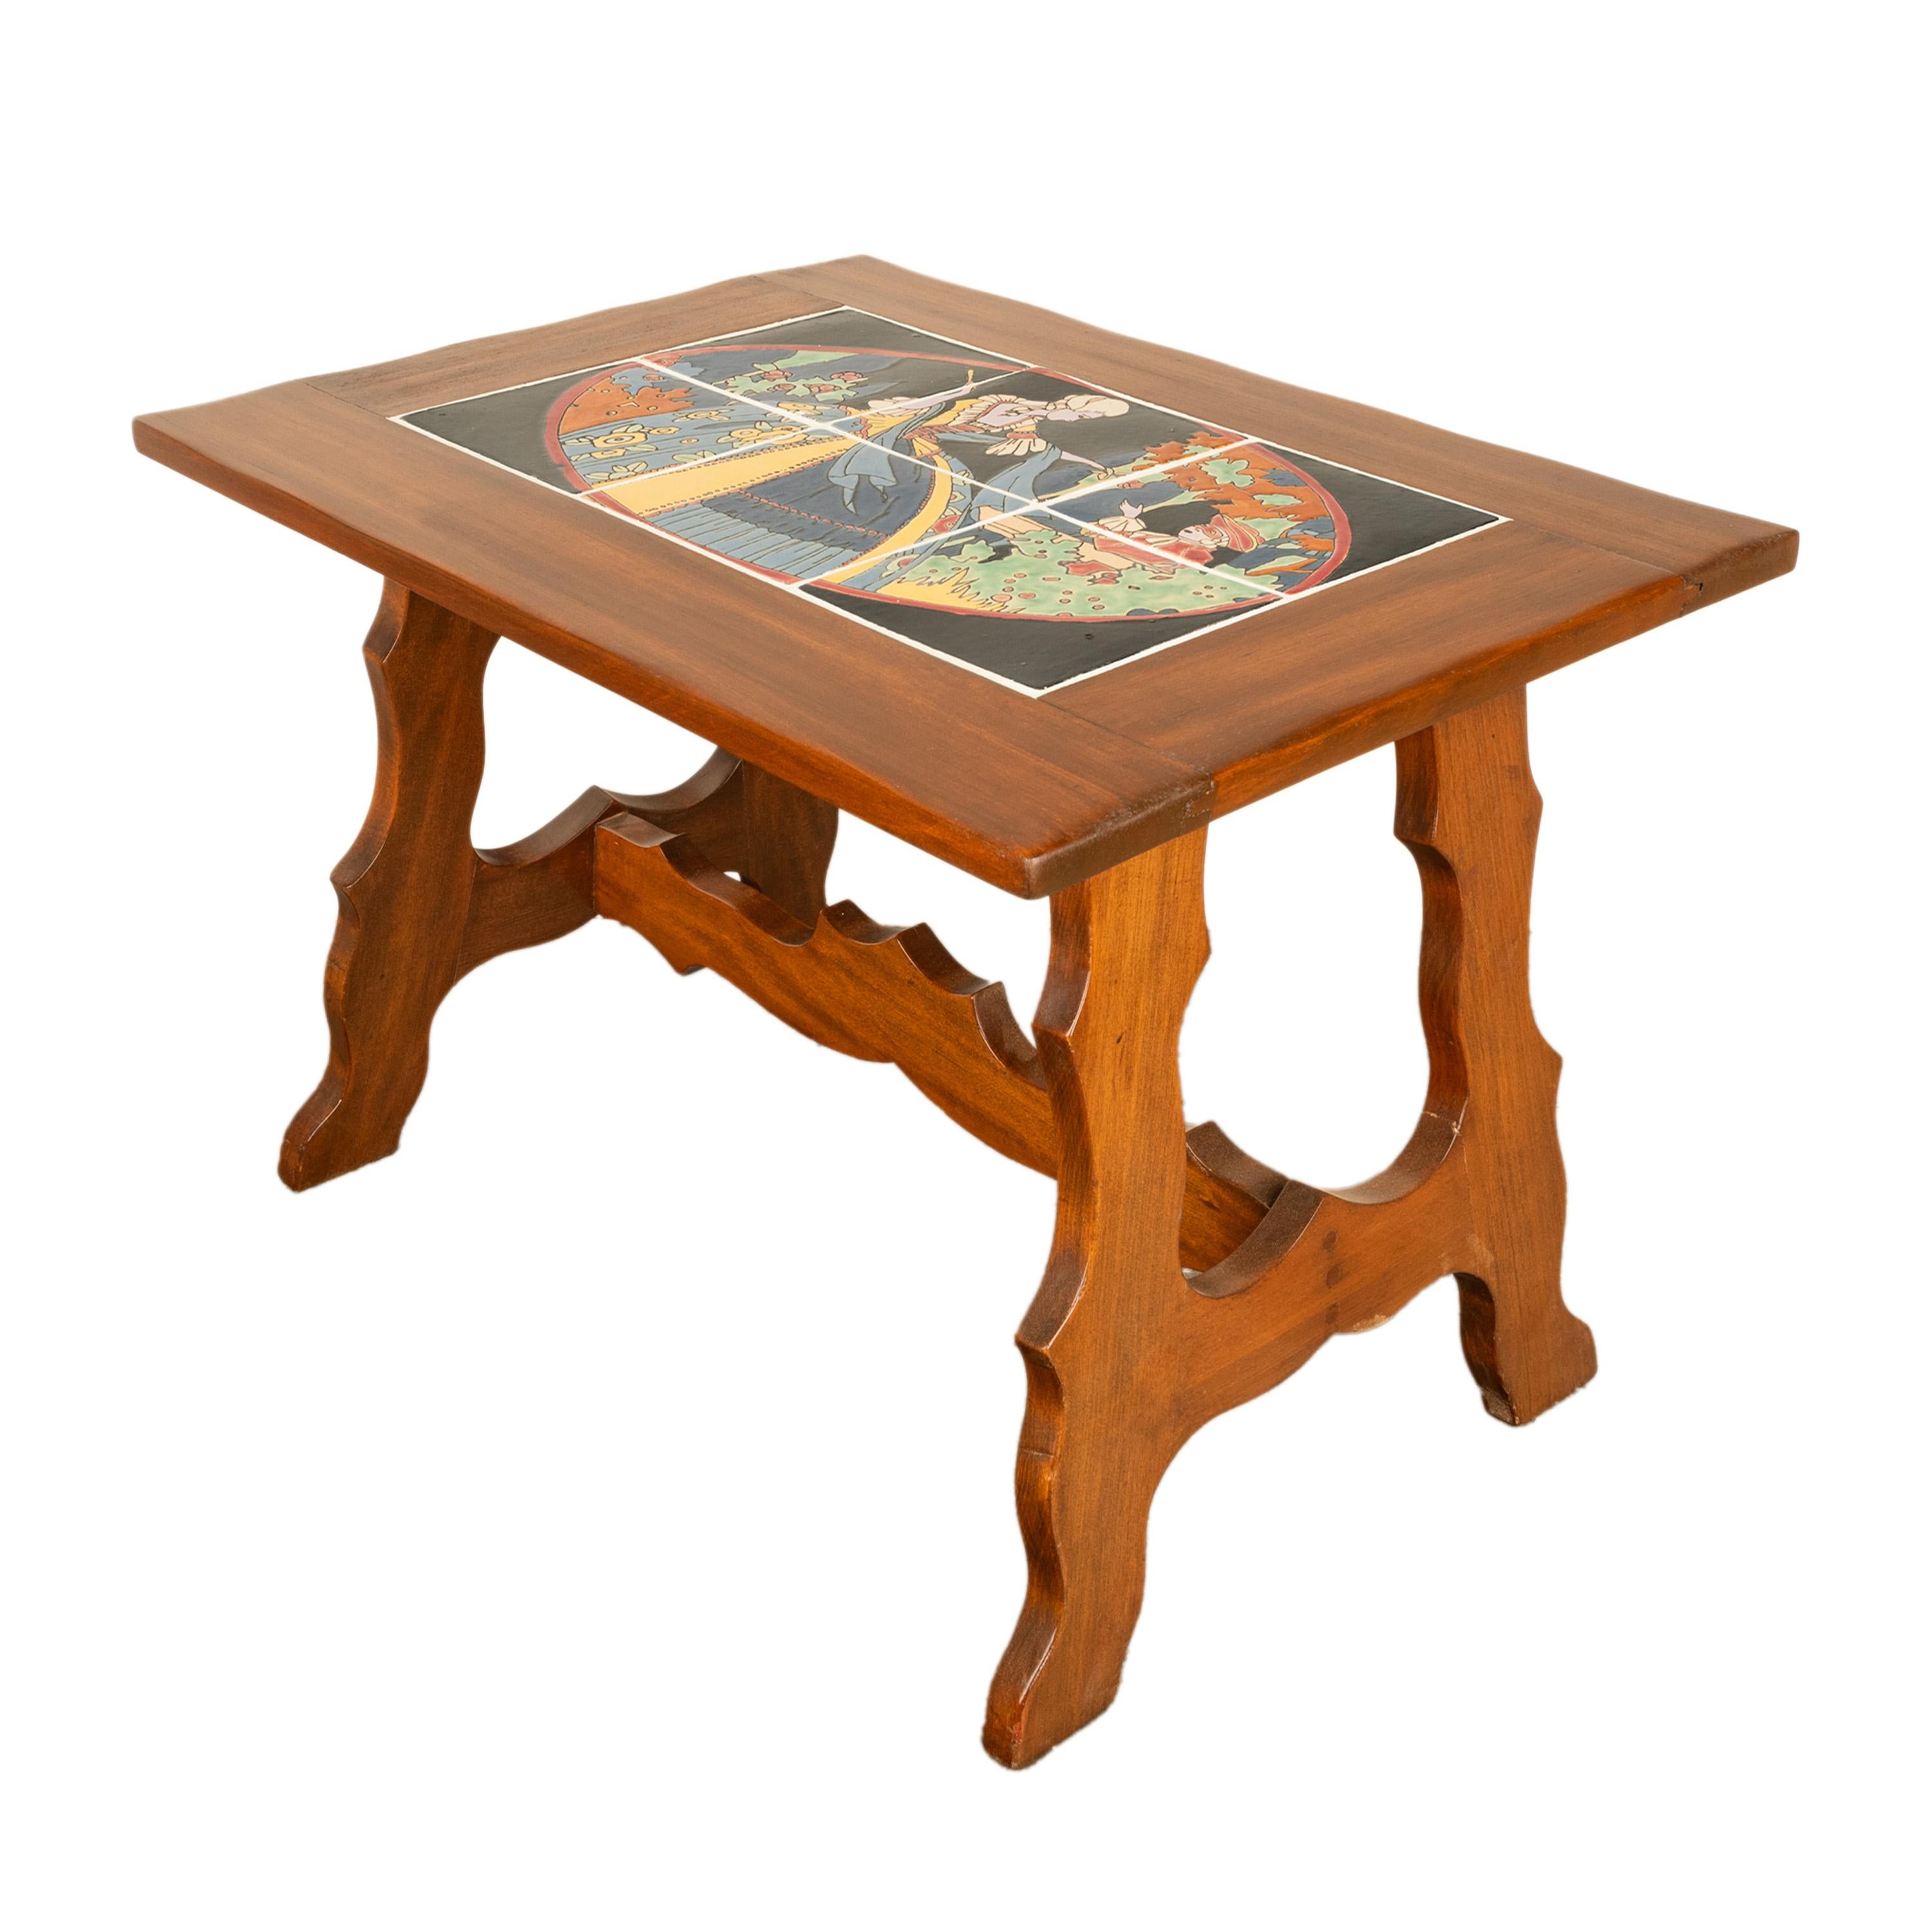 Antique Mission Catalina Monterrey California Tile Top Walnut Coffee Table 1930 For Sale 13